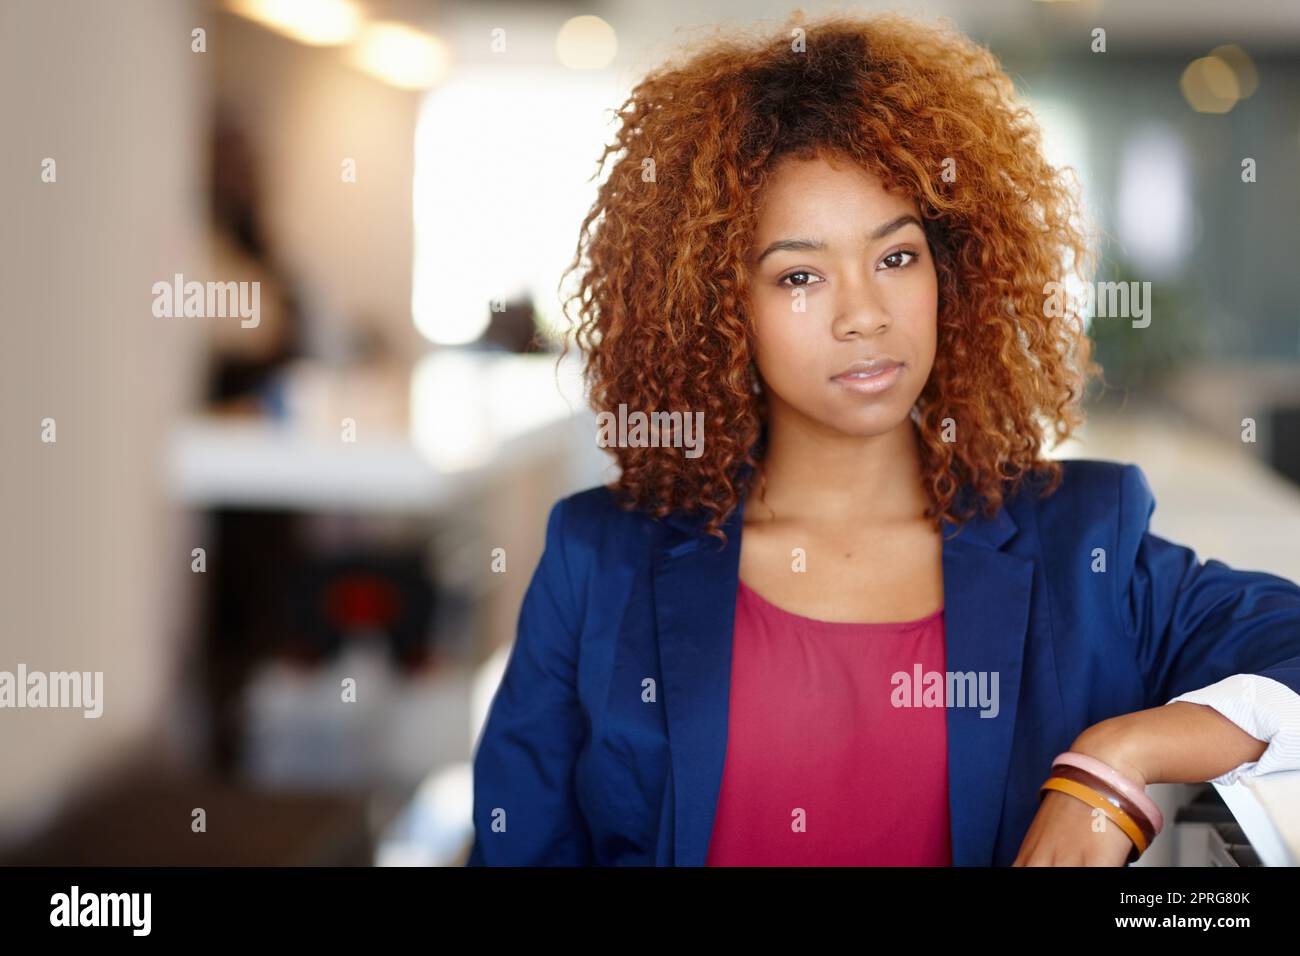 Failure is never an option for me. Portrait of a confident young businesswoman standing in an office. Stock Photo